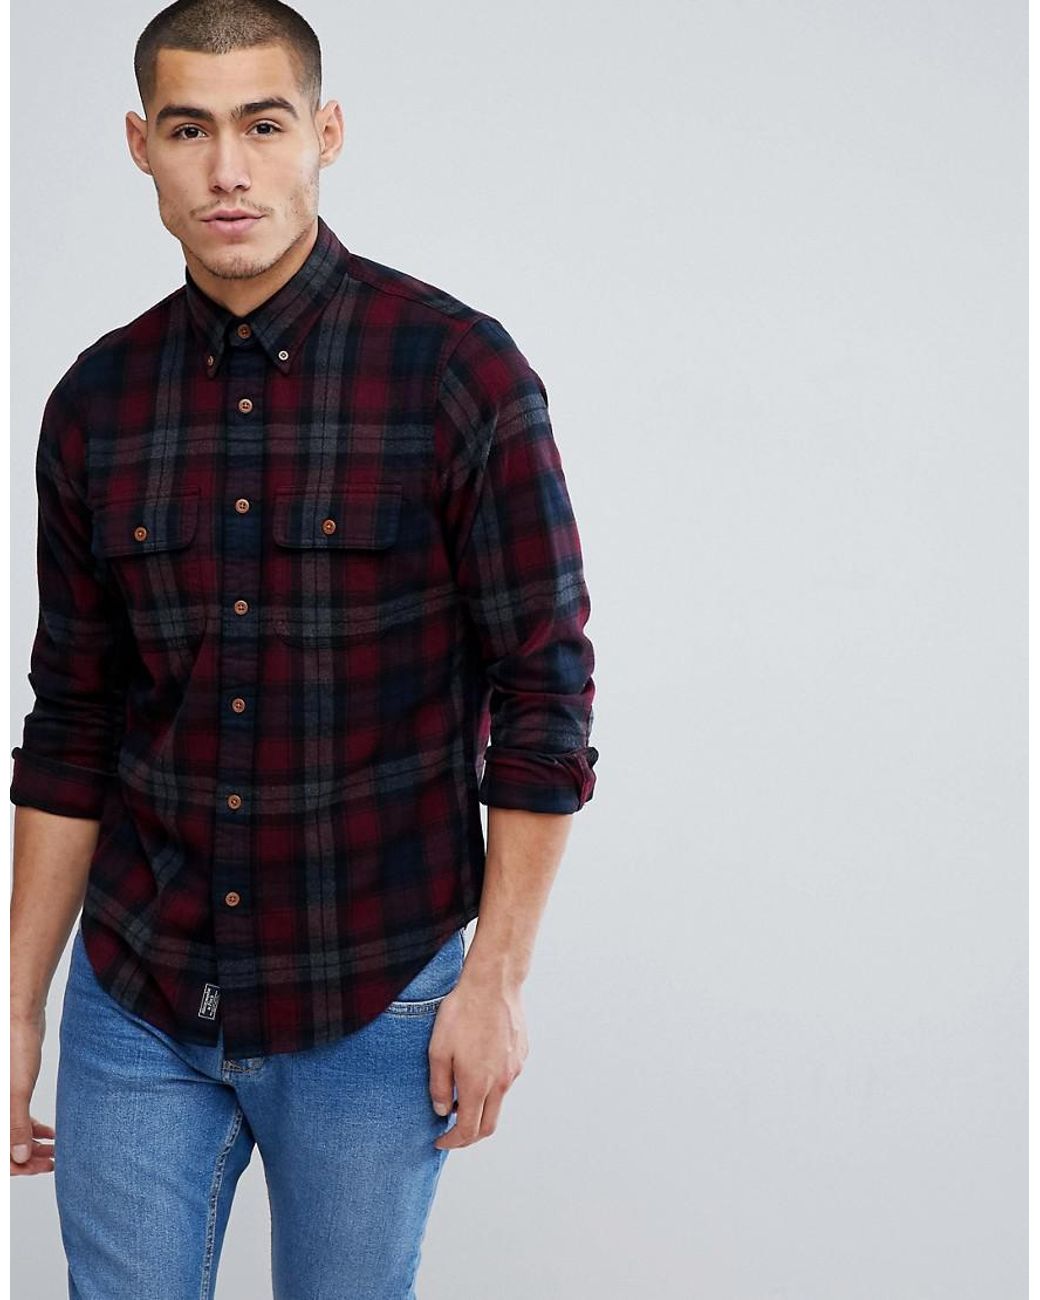 Abercrombie & Fitch Check Flannel Shirt Regular Fit In Burgundy Blackwatch  Plaid in Red for Men | Lyst